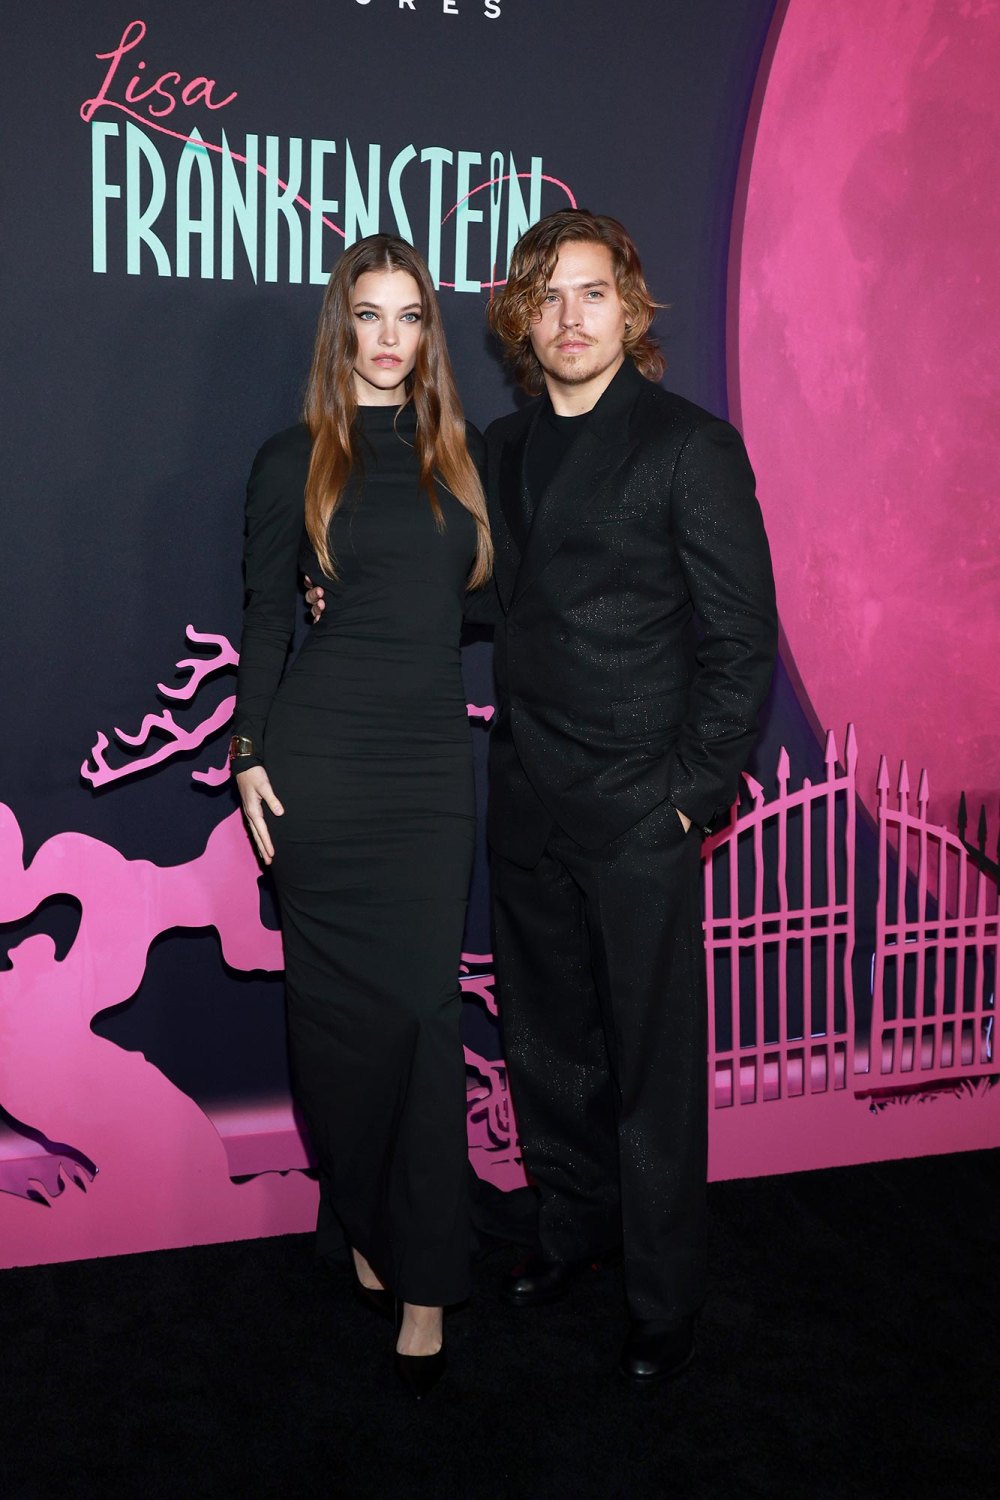 Dylan Sprouse and Barbara Palvin Coordinate in Black on Date Night at Lisa Frankenstein Screening